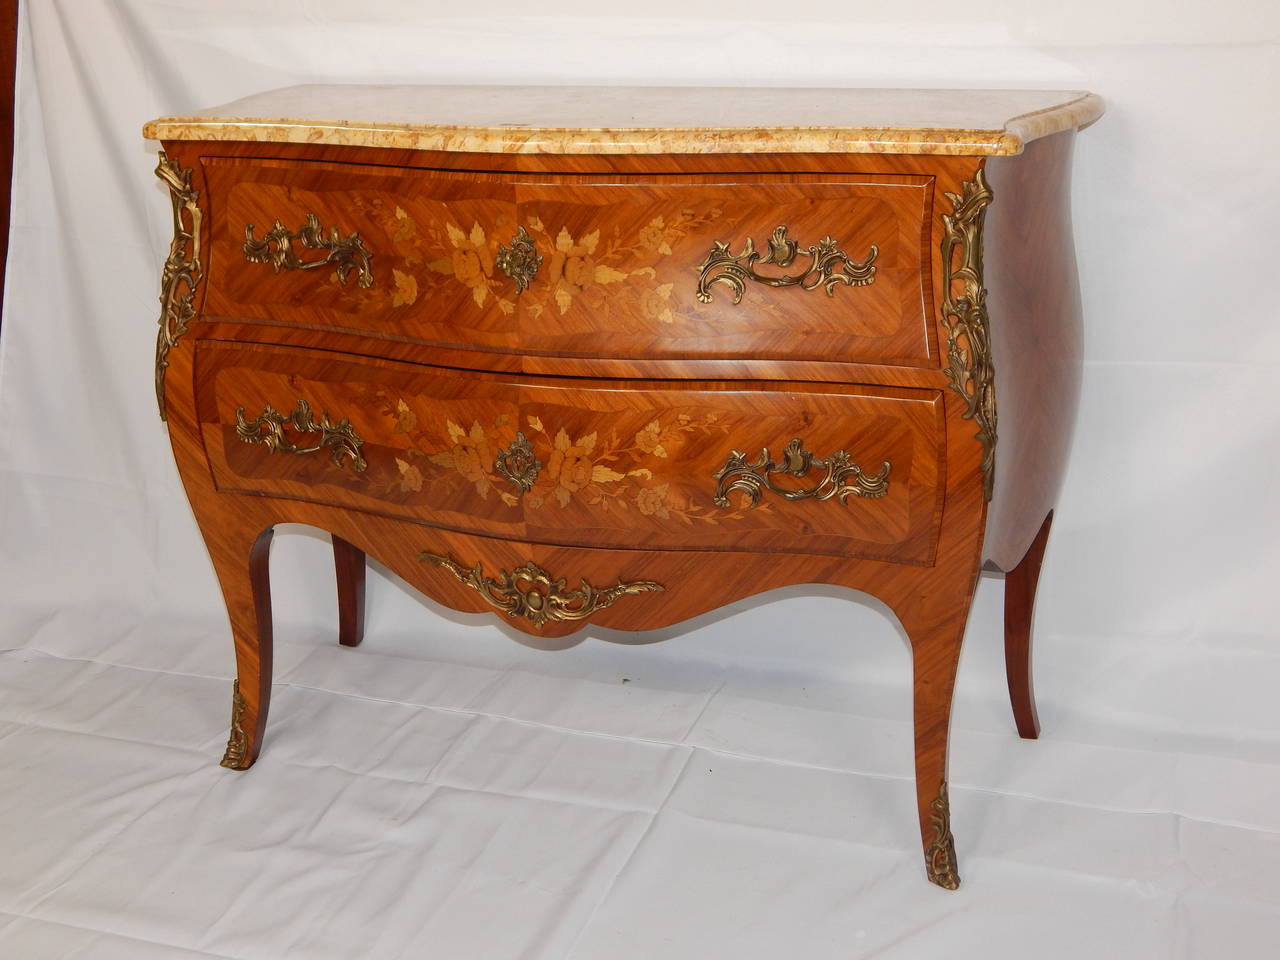 Marquetry inlaid marble-top two-drawer commode with bronze mounts, 
and a serpentine front.